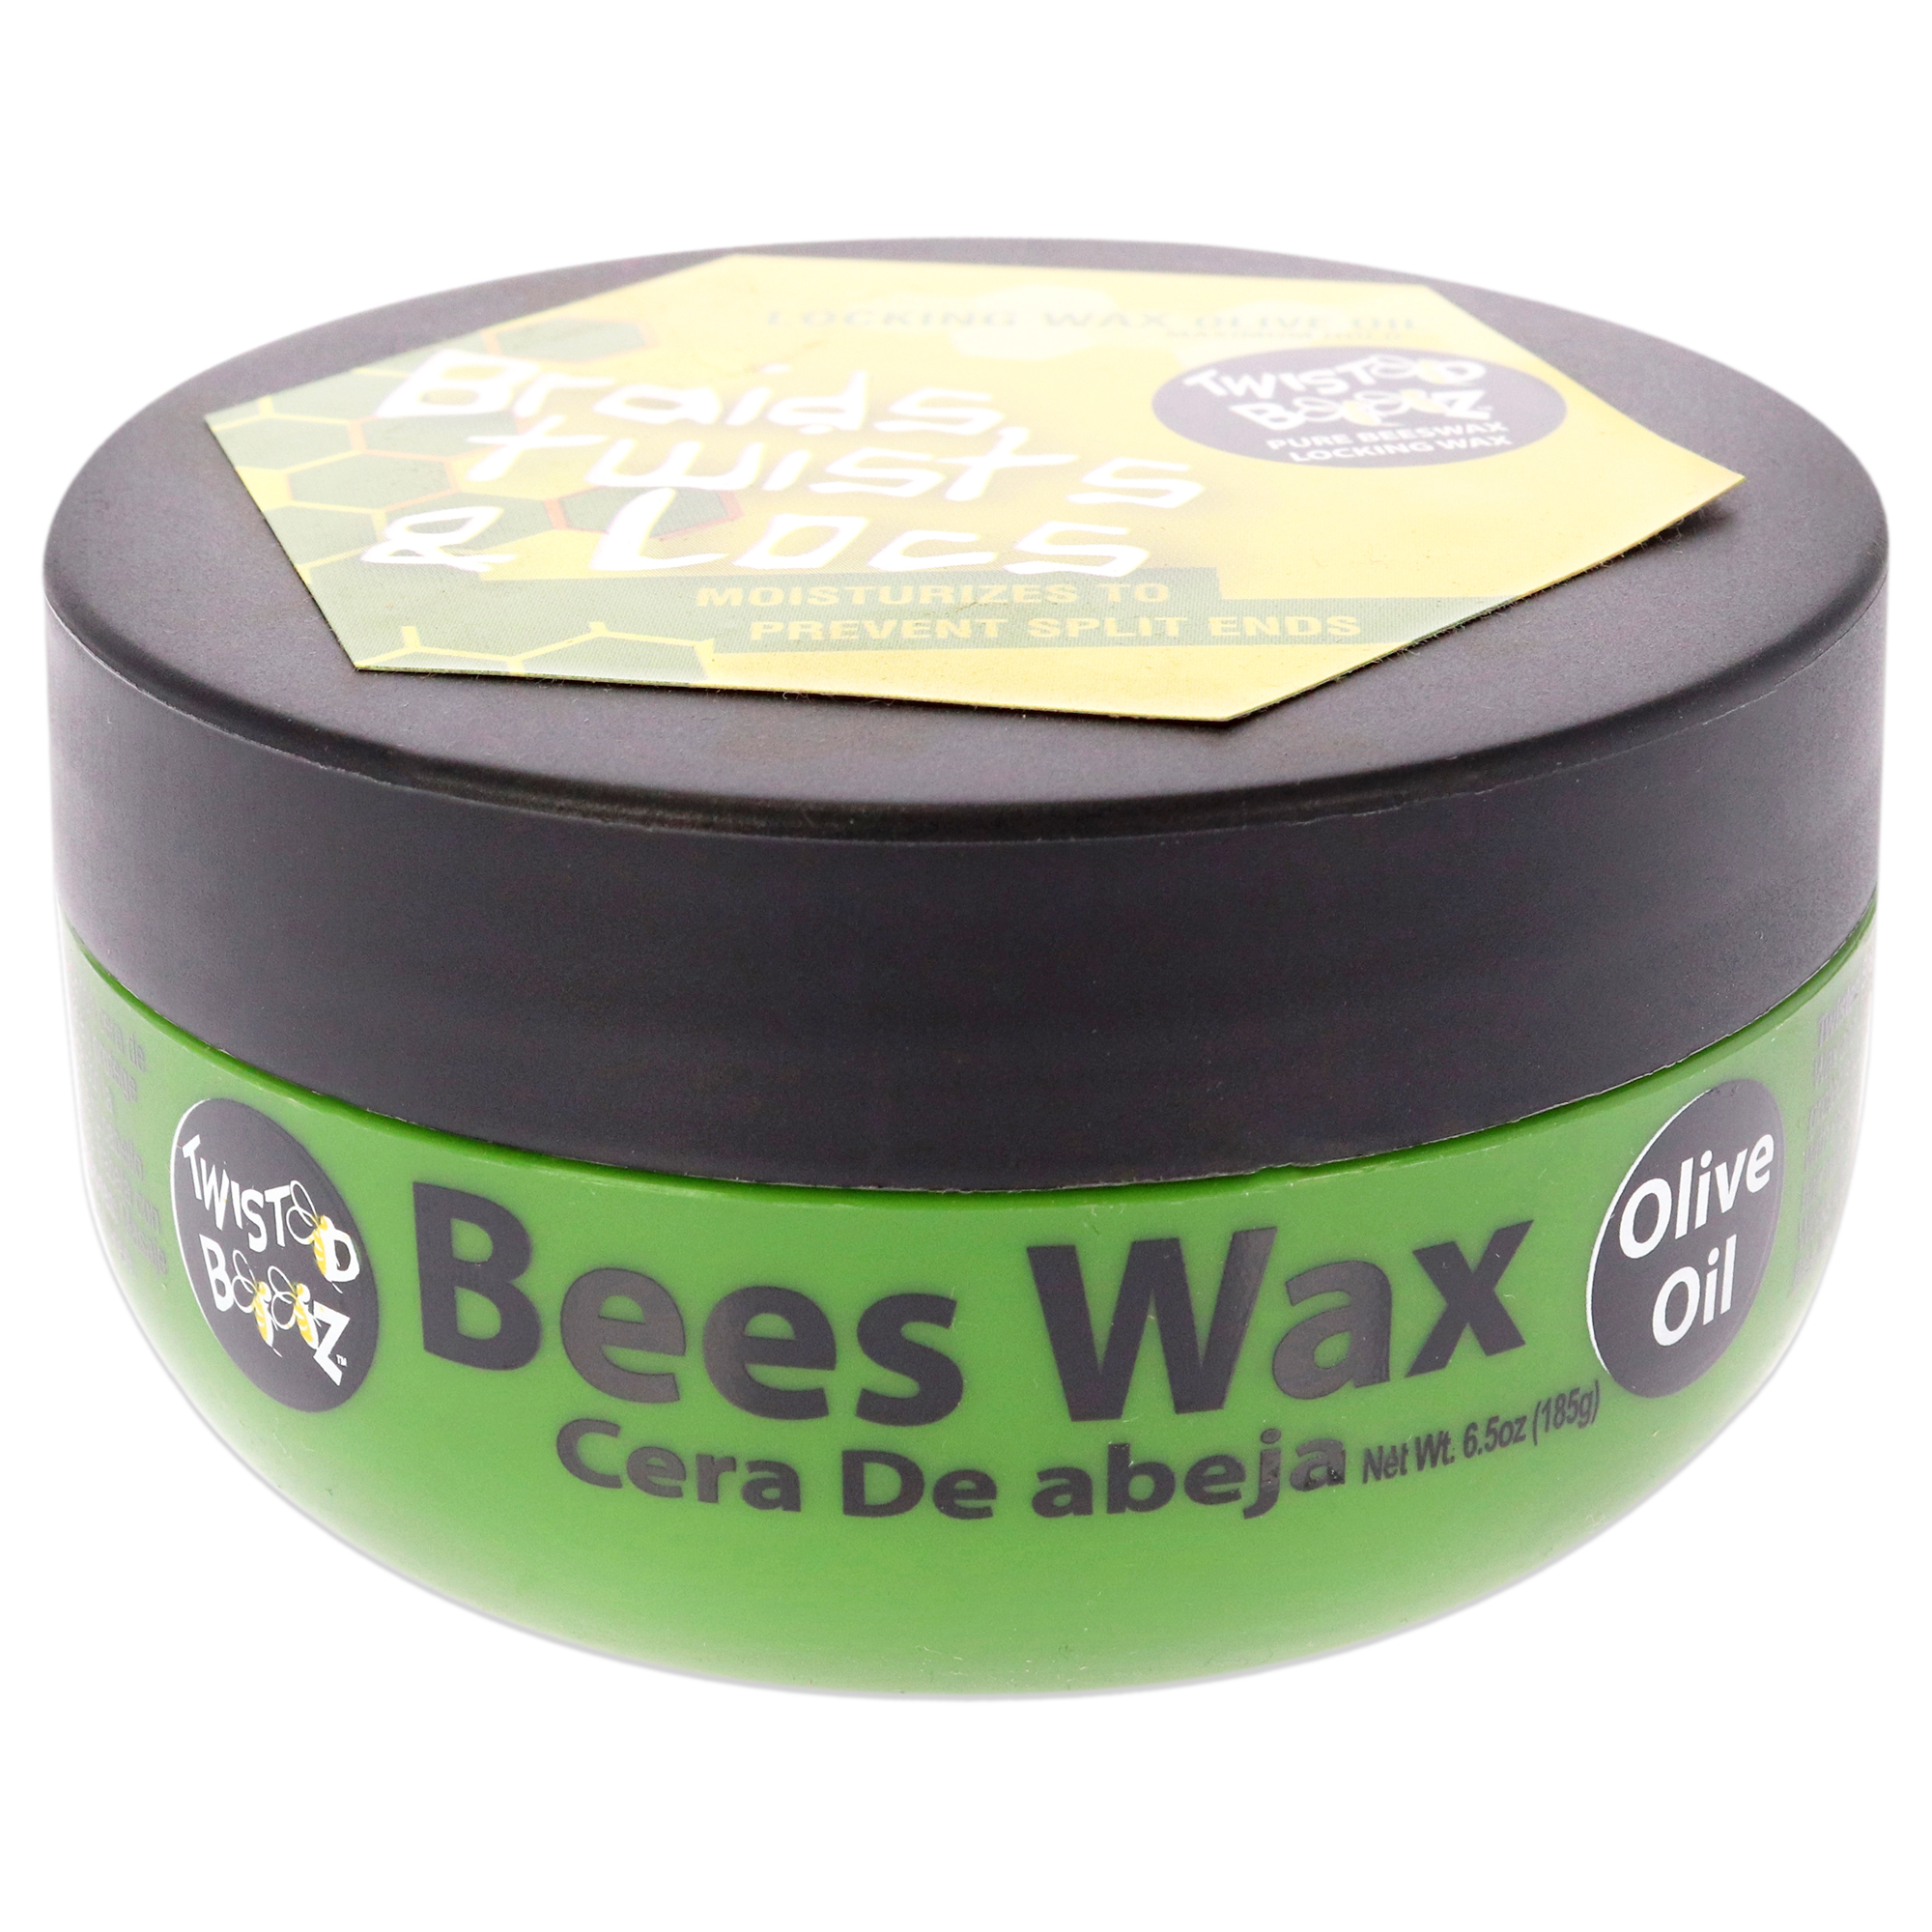 Twisted Bees Wax - Olive Oil by Ecoco for Unisex - 6&period;5 oz Wax